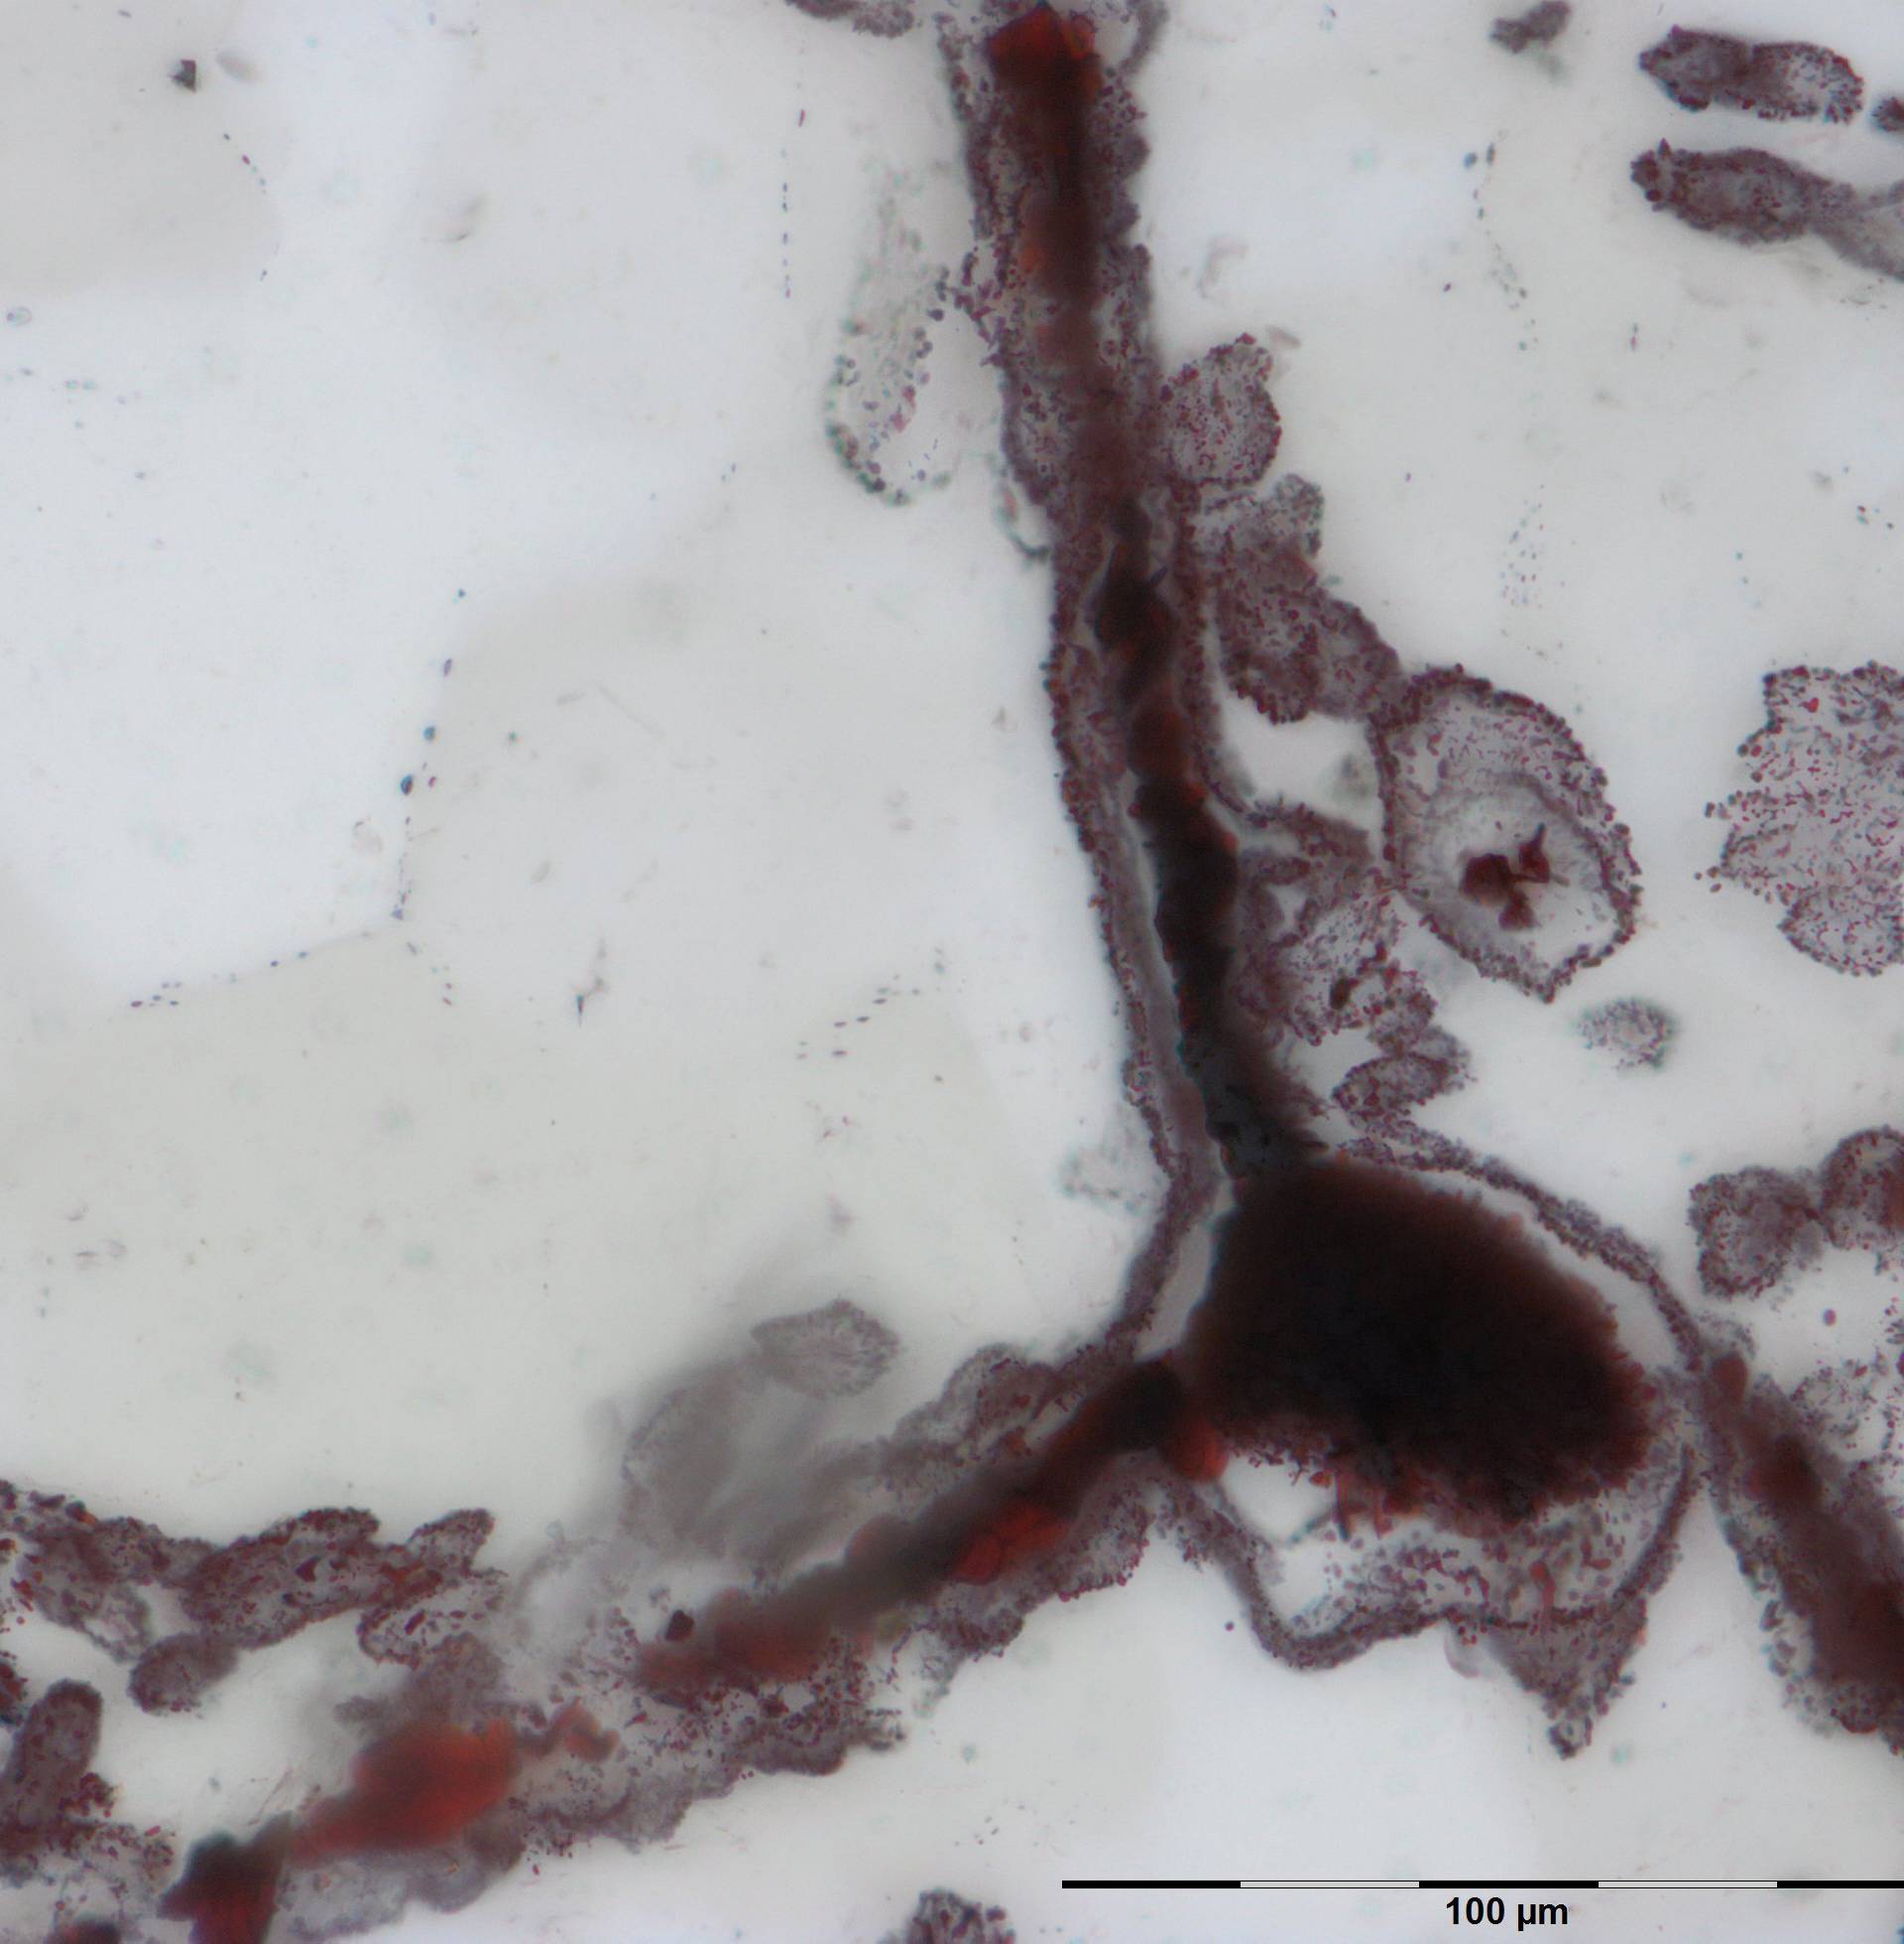 A haematite filament attached to a clump of iron (in the lower right), from hydrothermal vent deposits in the Nuvvuagittuq Supracrustal Belt in QuÃ©bec, Canada is pictured in this handout photo